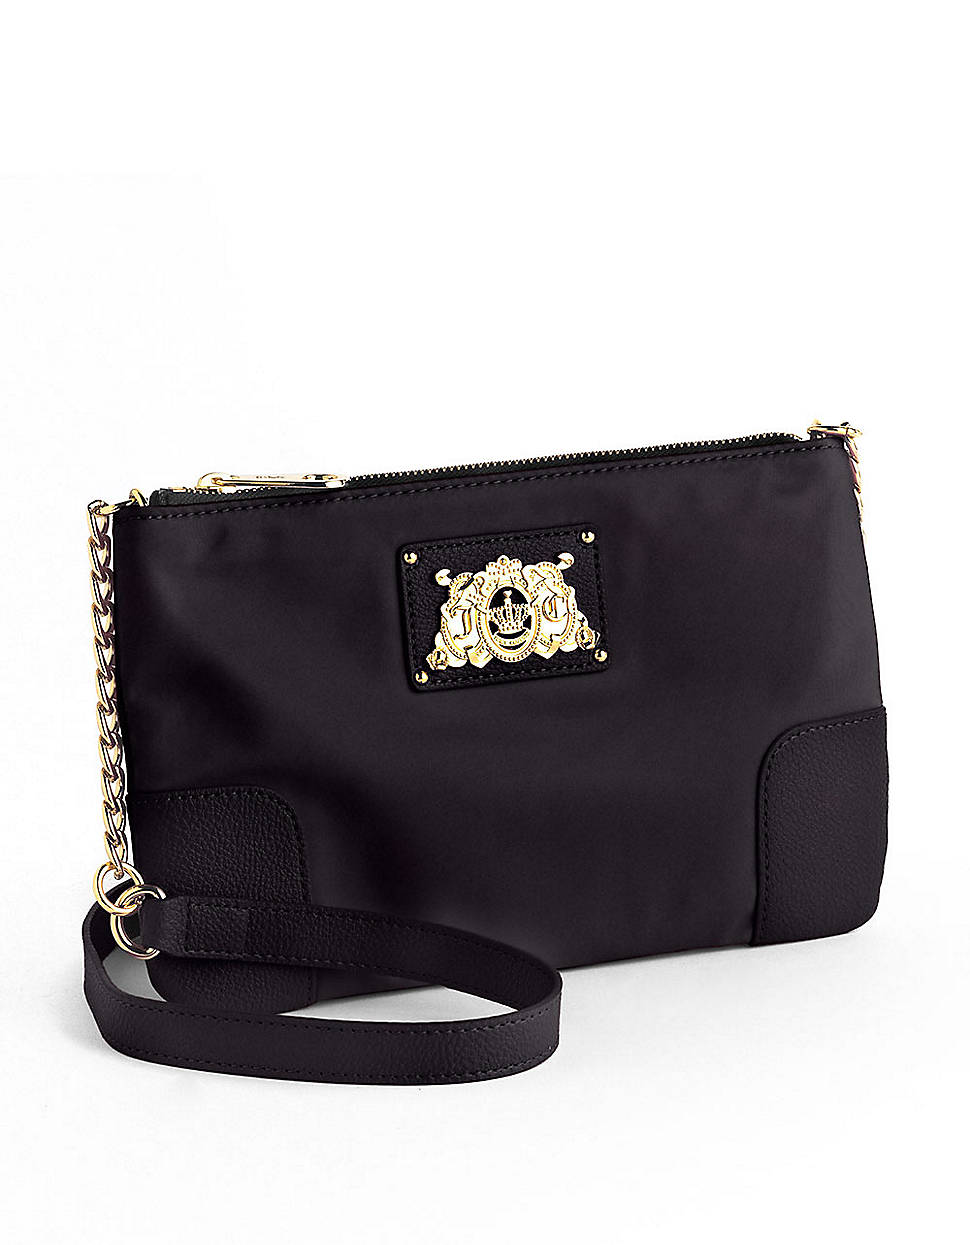 Juicy Couture Lou Lou Leather Crossbody Bag in Black